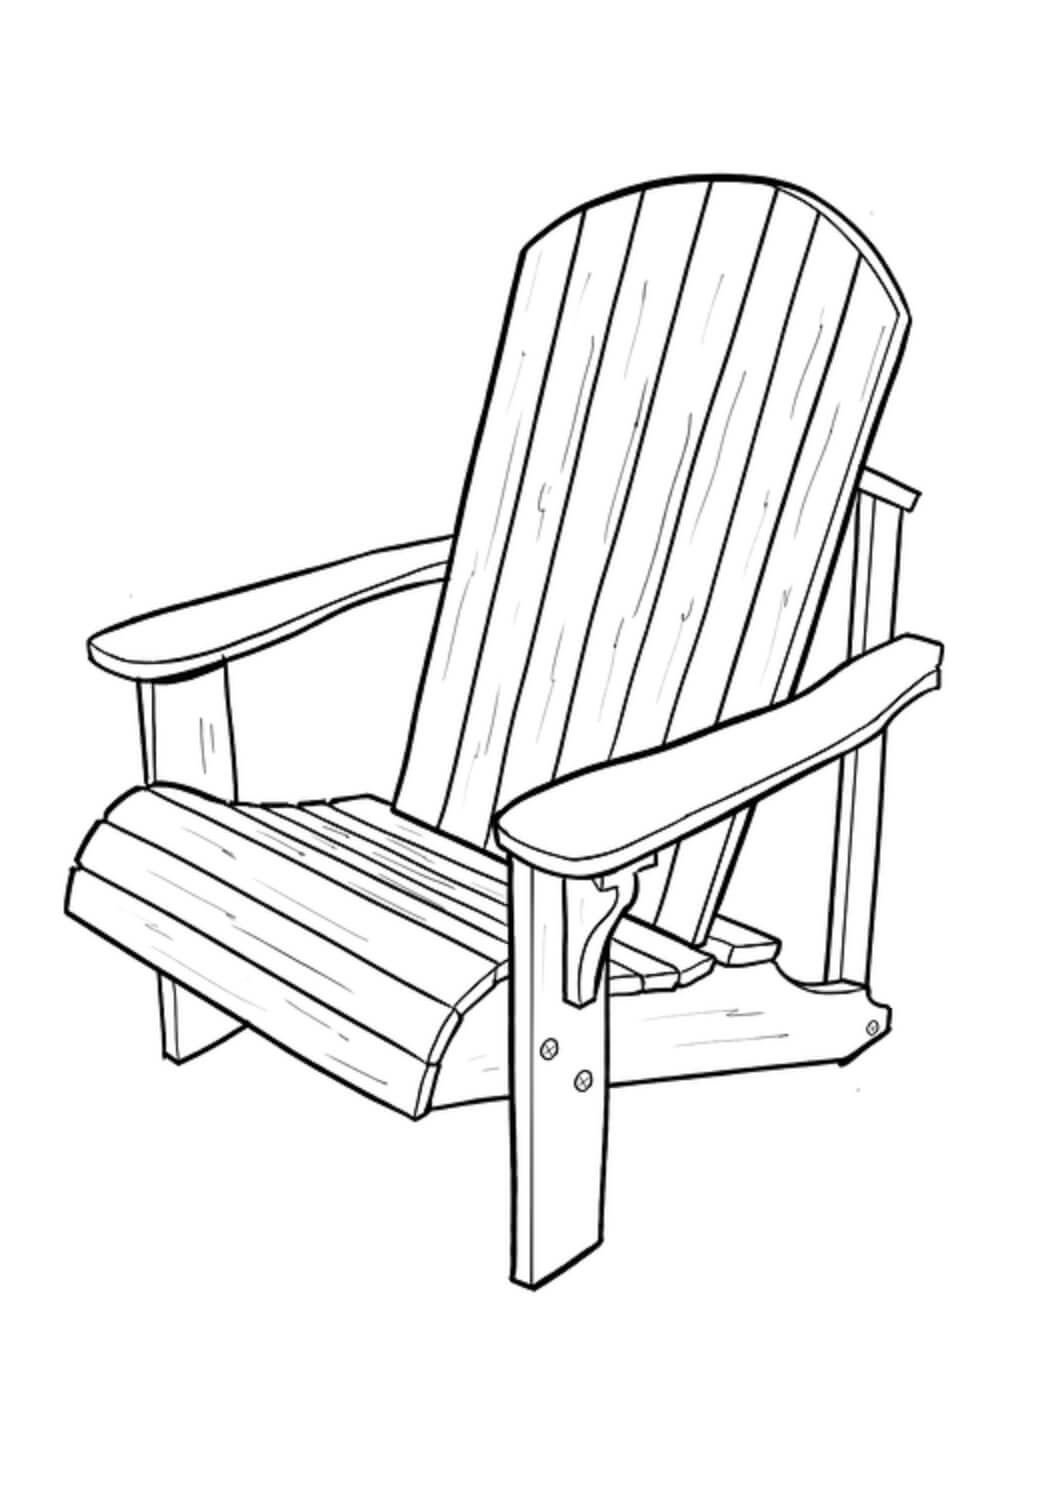 Chaise Adirondack coloring page